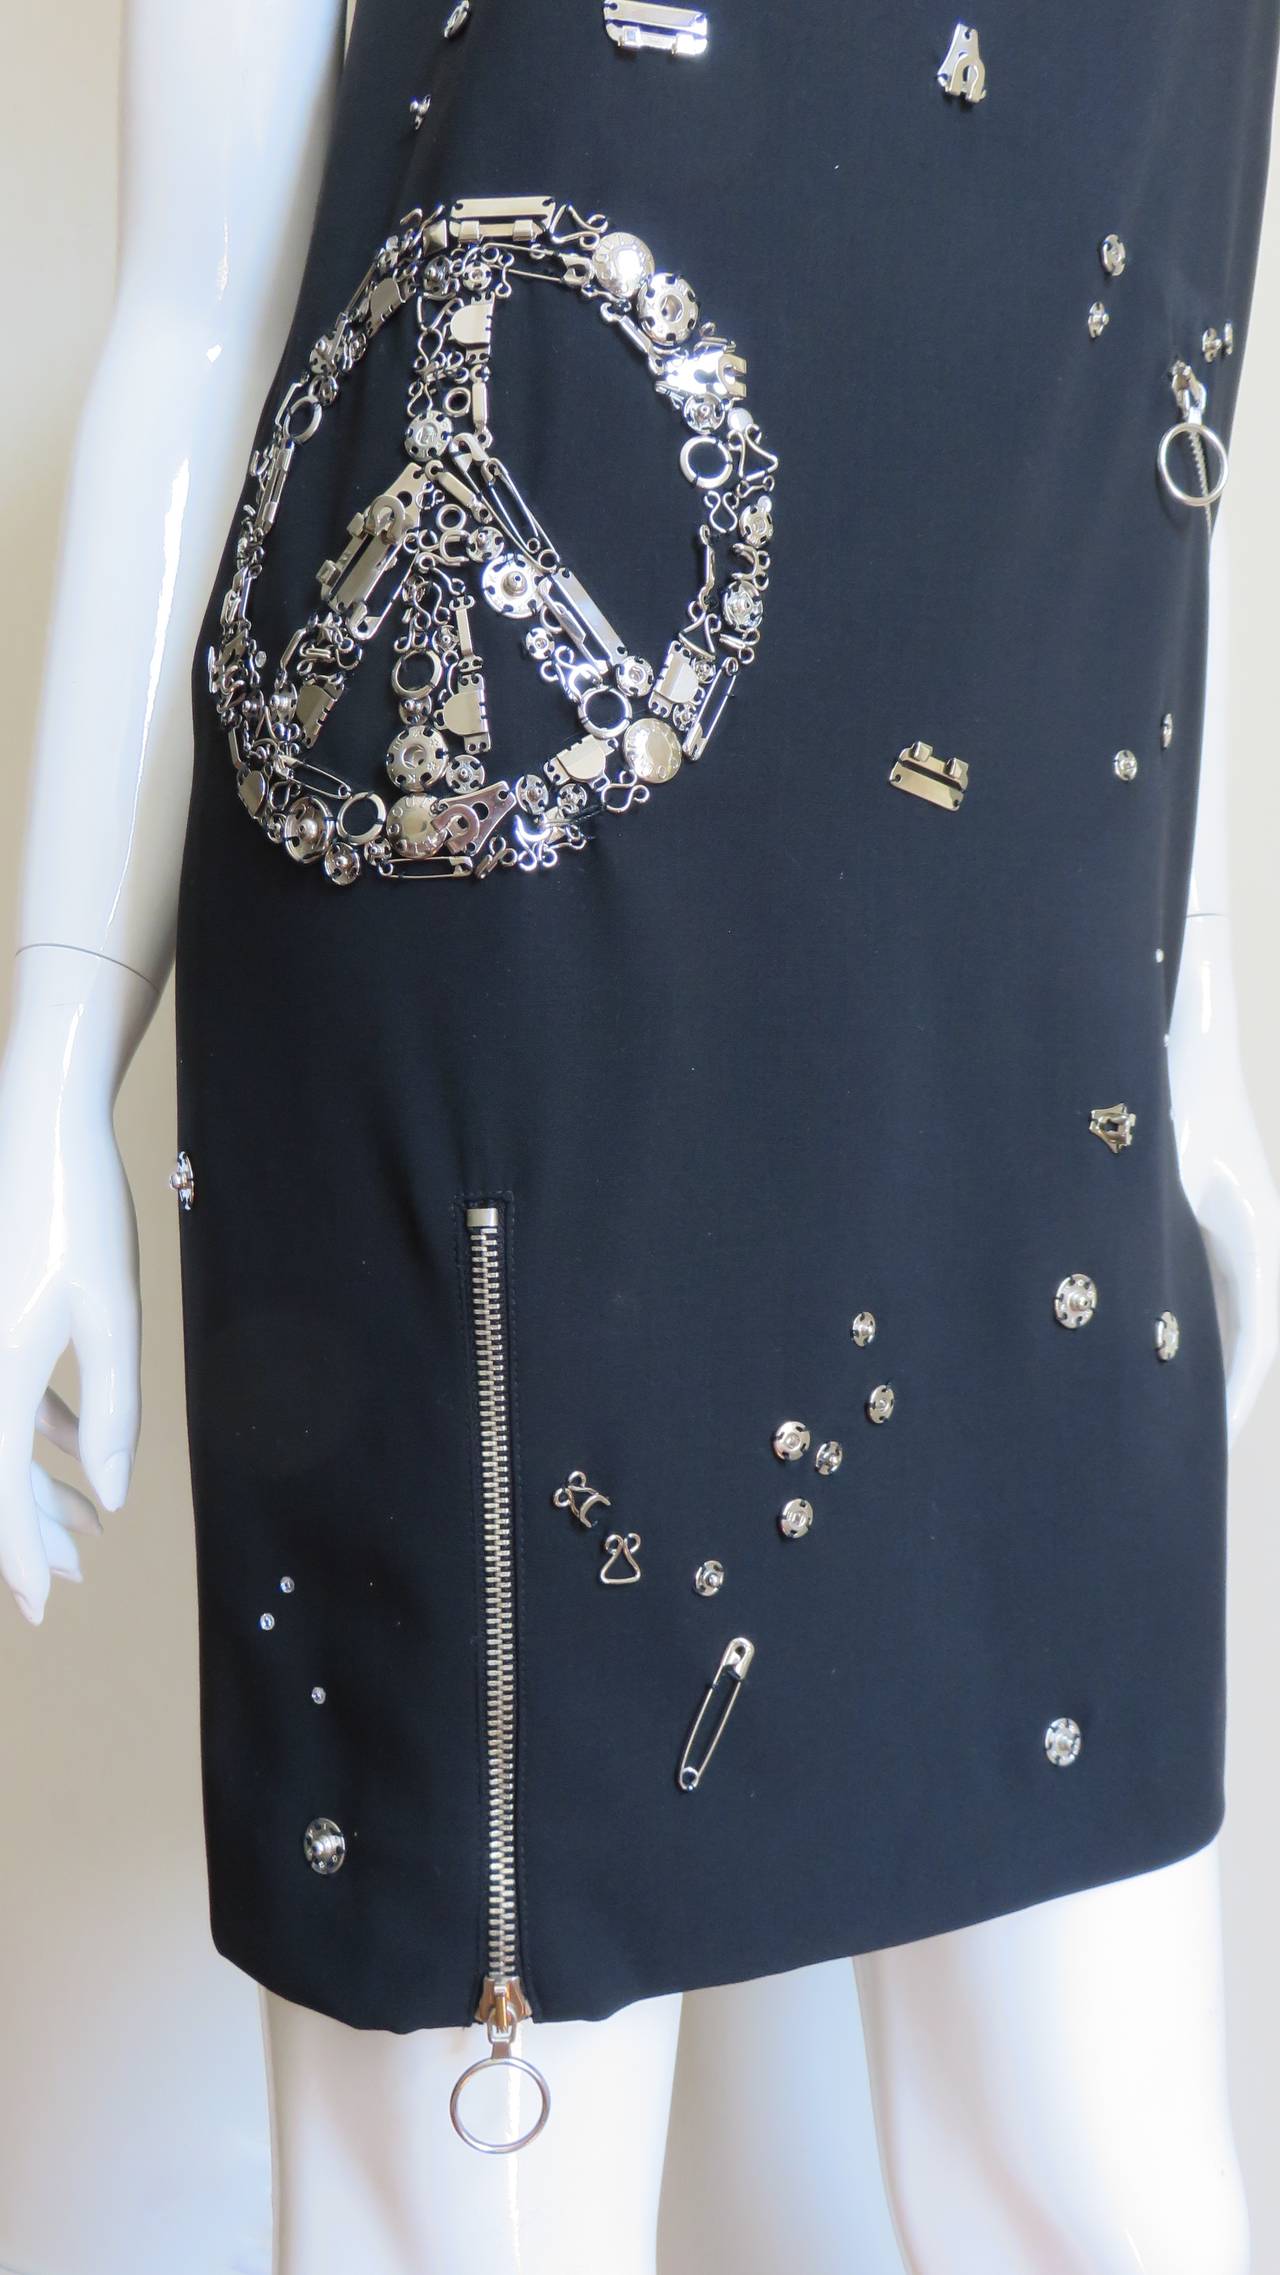 Moschino Couture Dress with Hardware In Excellent Condition For Sale In Water Mill, NY